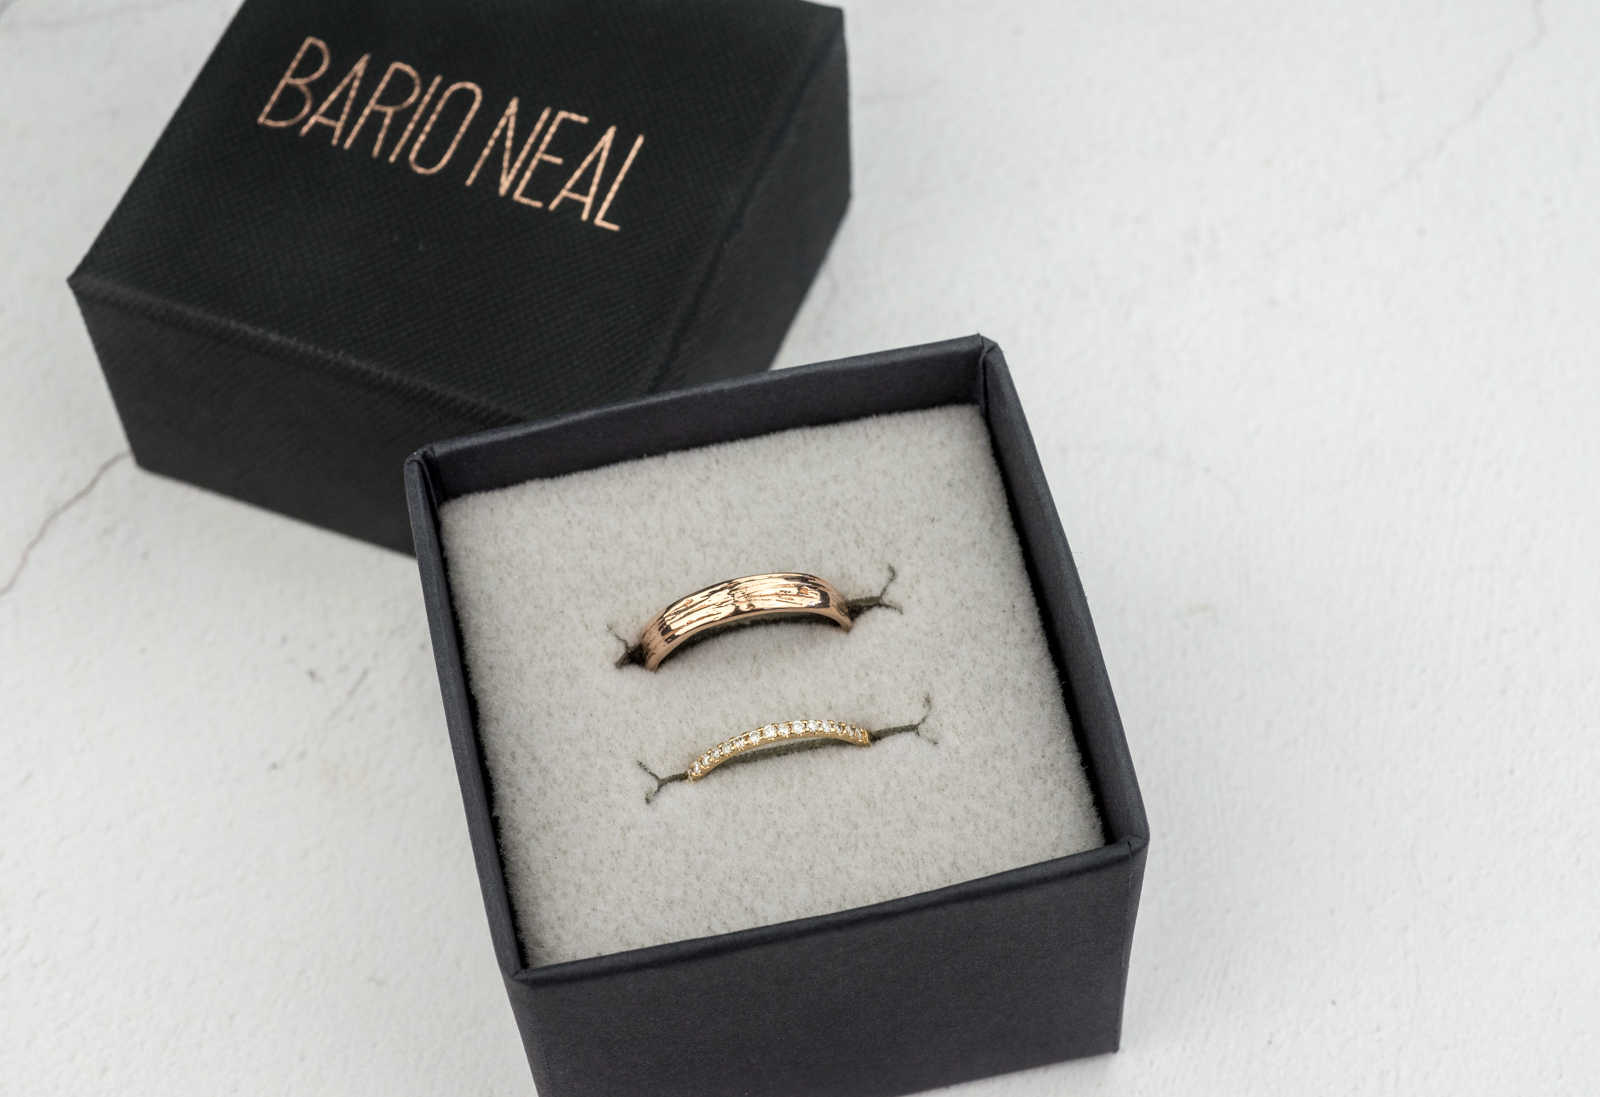 Quill Wedding B and  and Half Eternity Diamond Wedding B and in Bario Neal Box